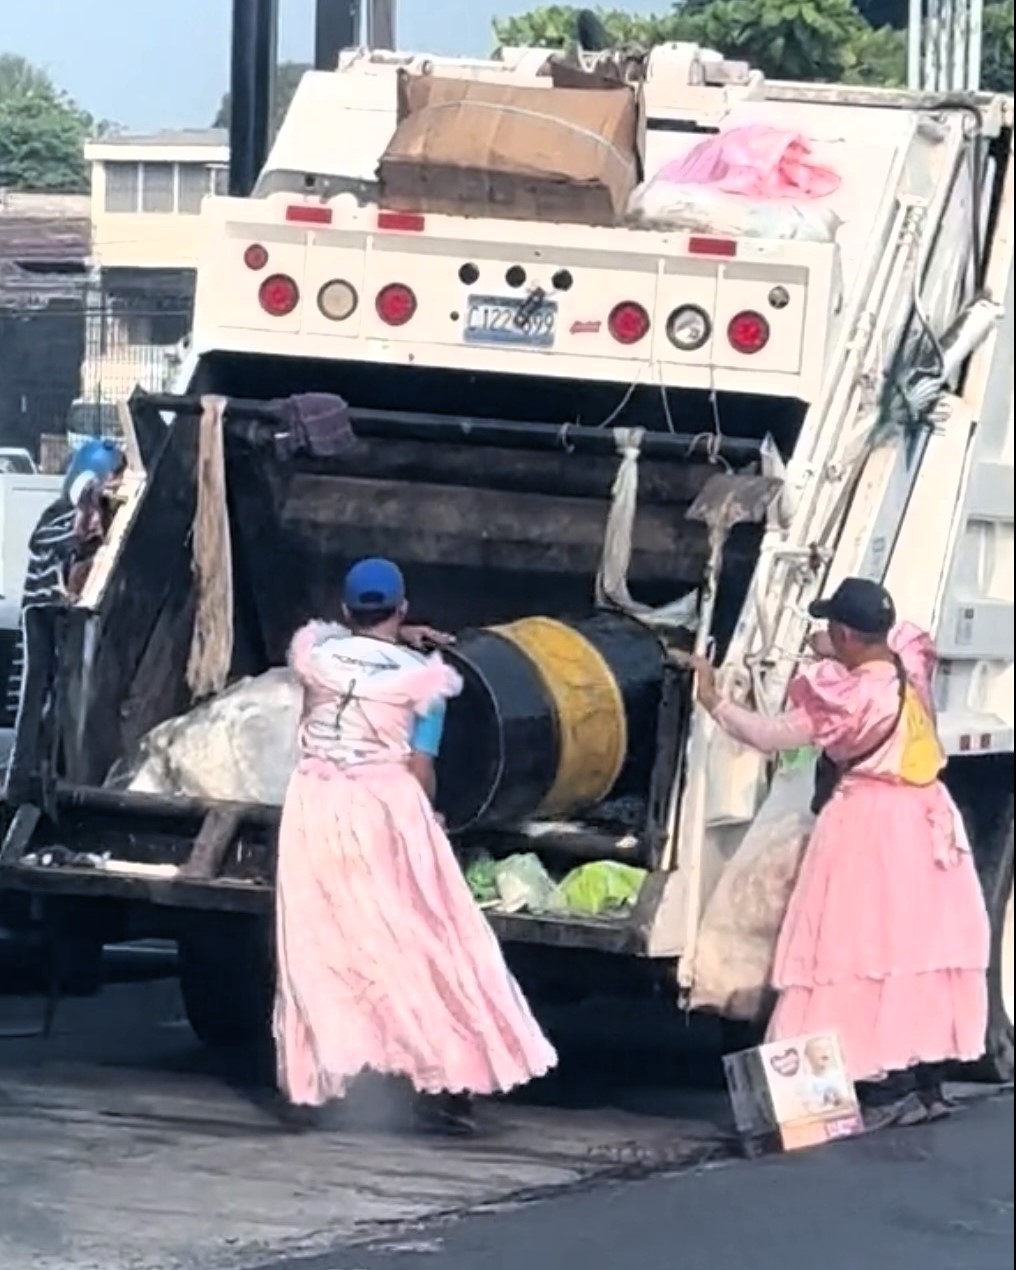 Bin men in El Salvador don princess dresses while collecting rubbish to cheer locals. The TikTok video goes viral with 5.9M views and 7K comments, spreading smiles and joy.